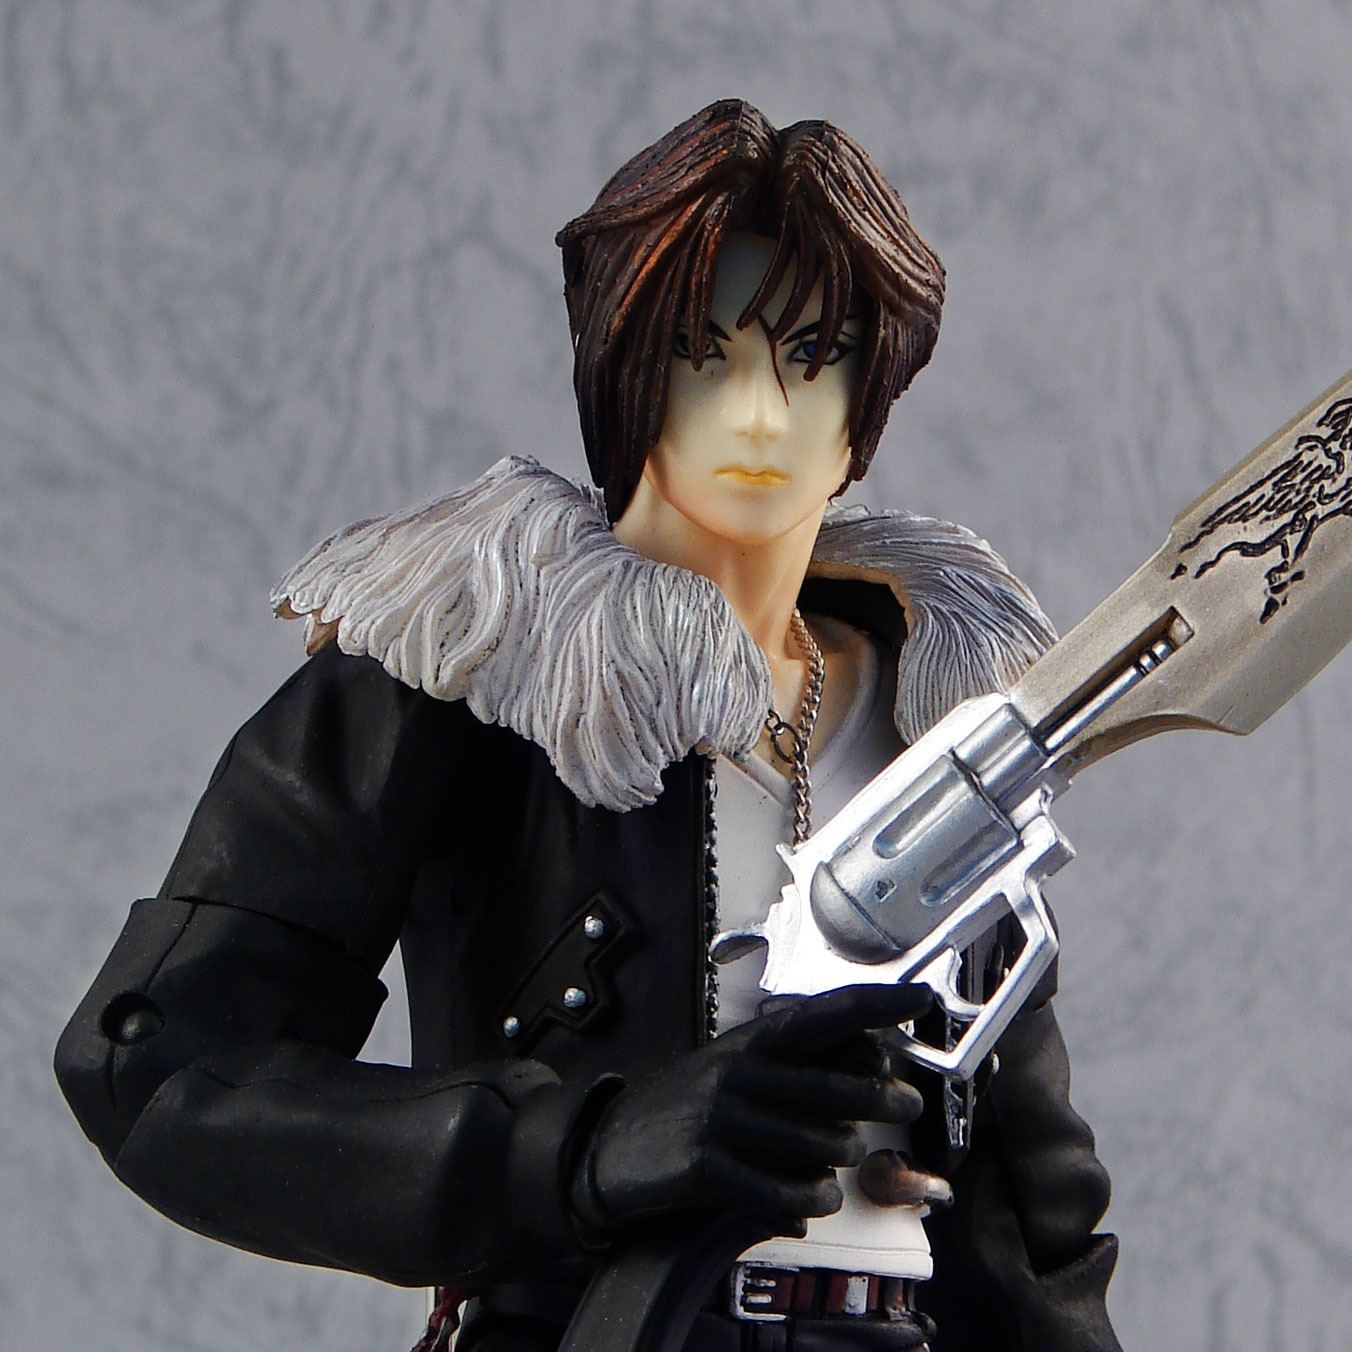 squall action figure